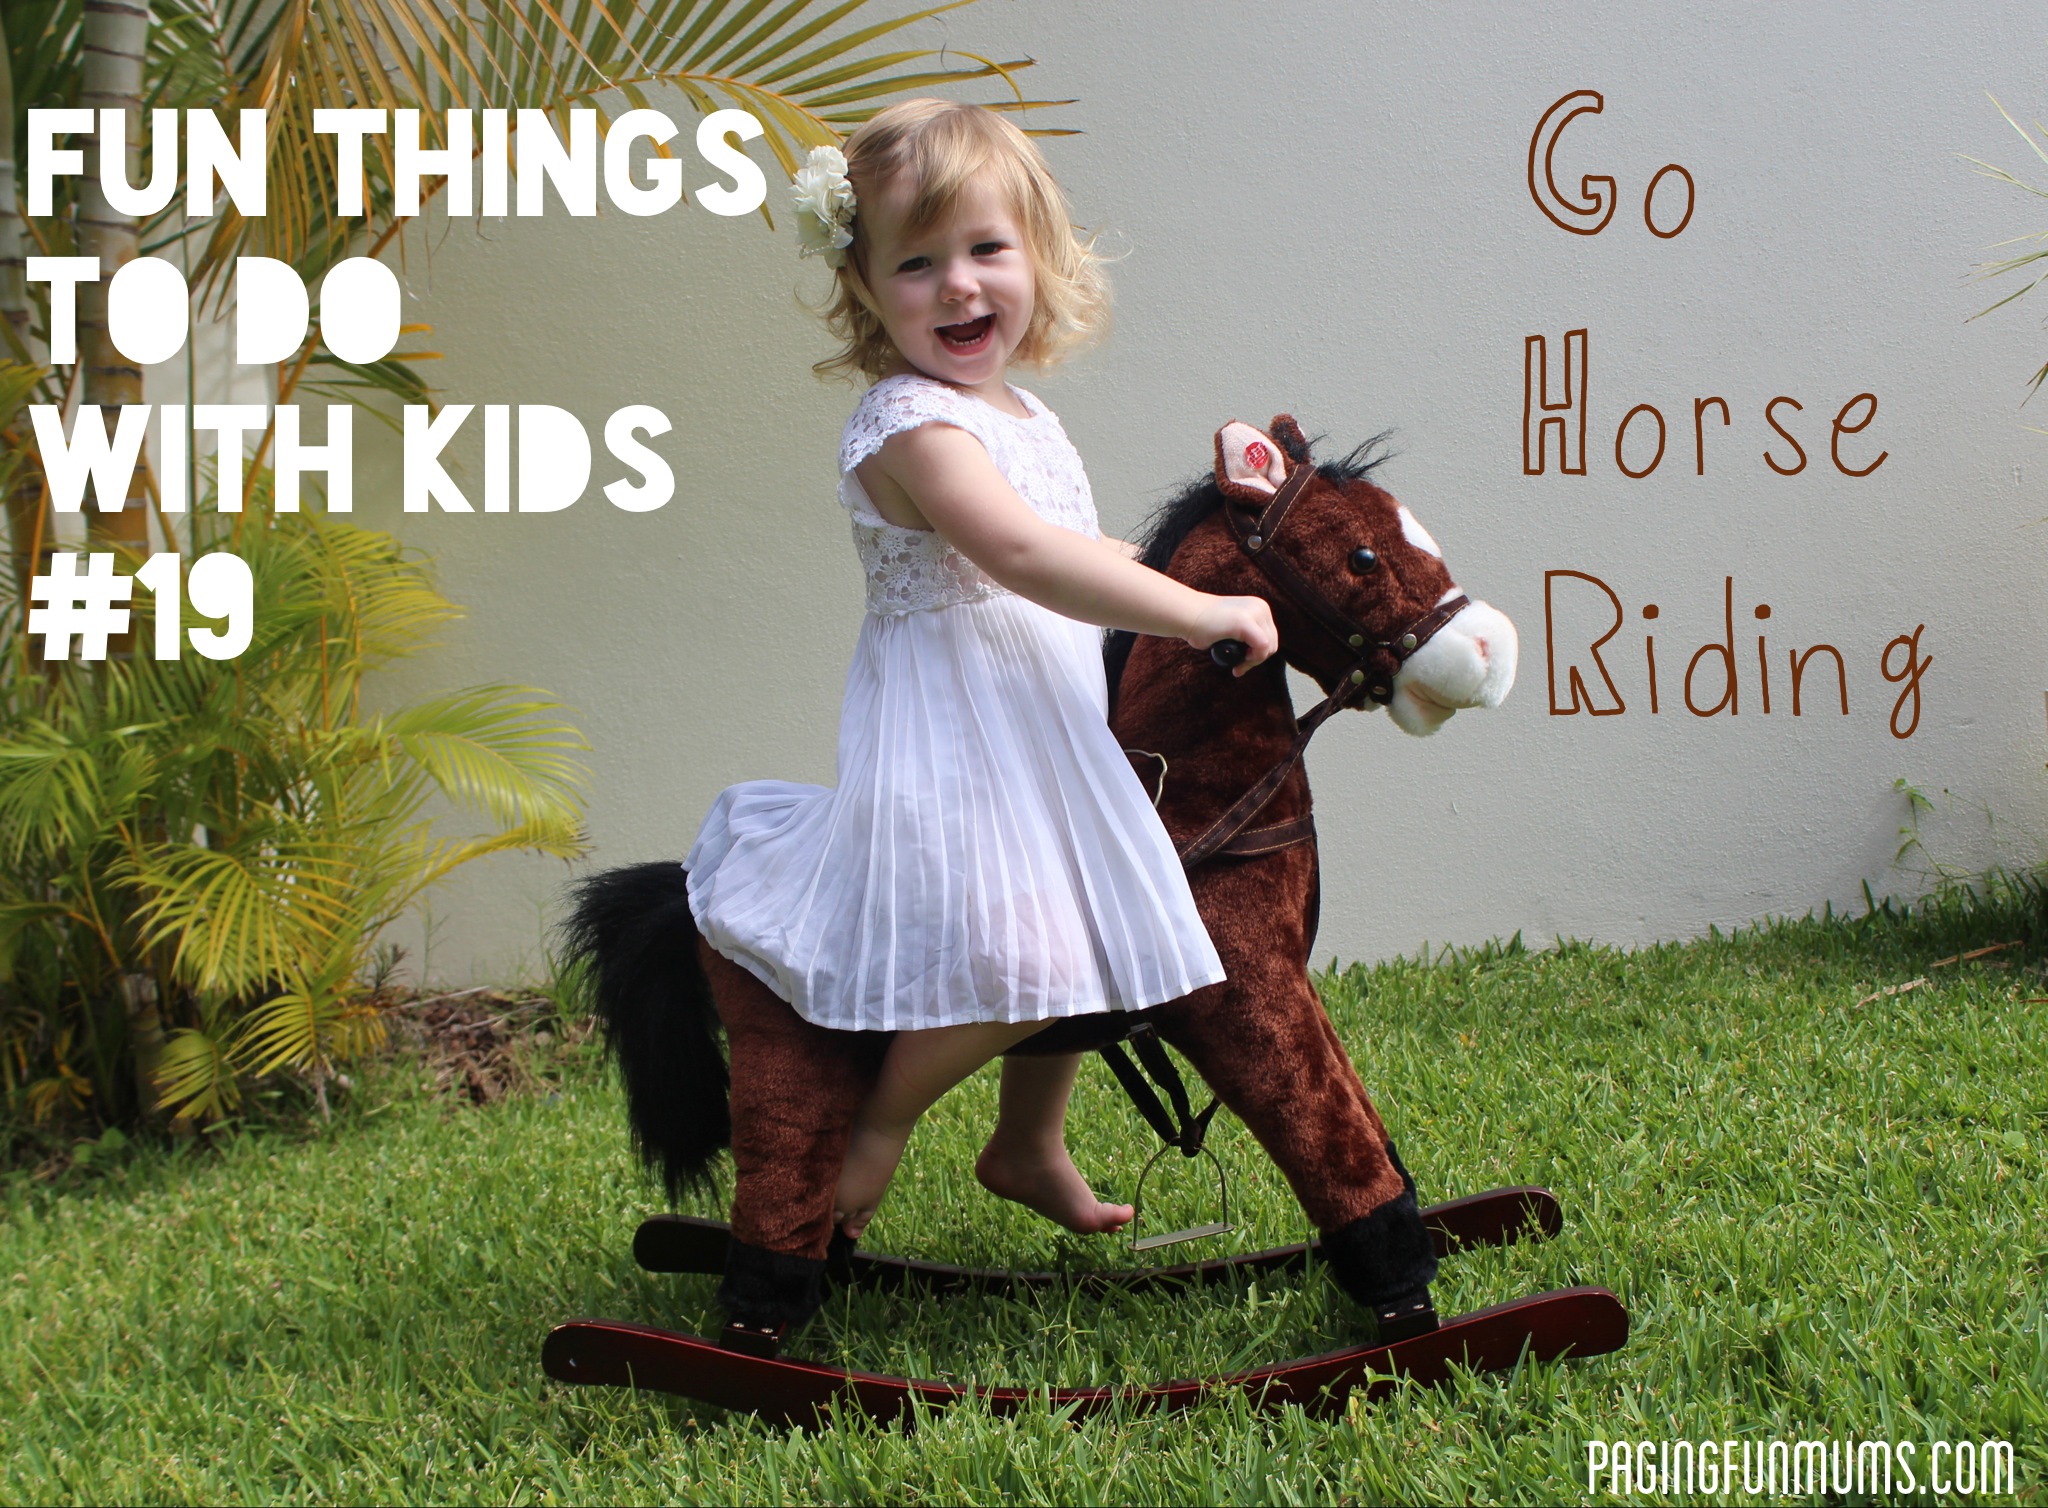 Fun things to do with kids